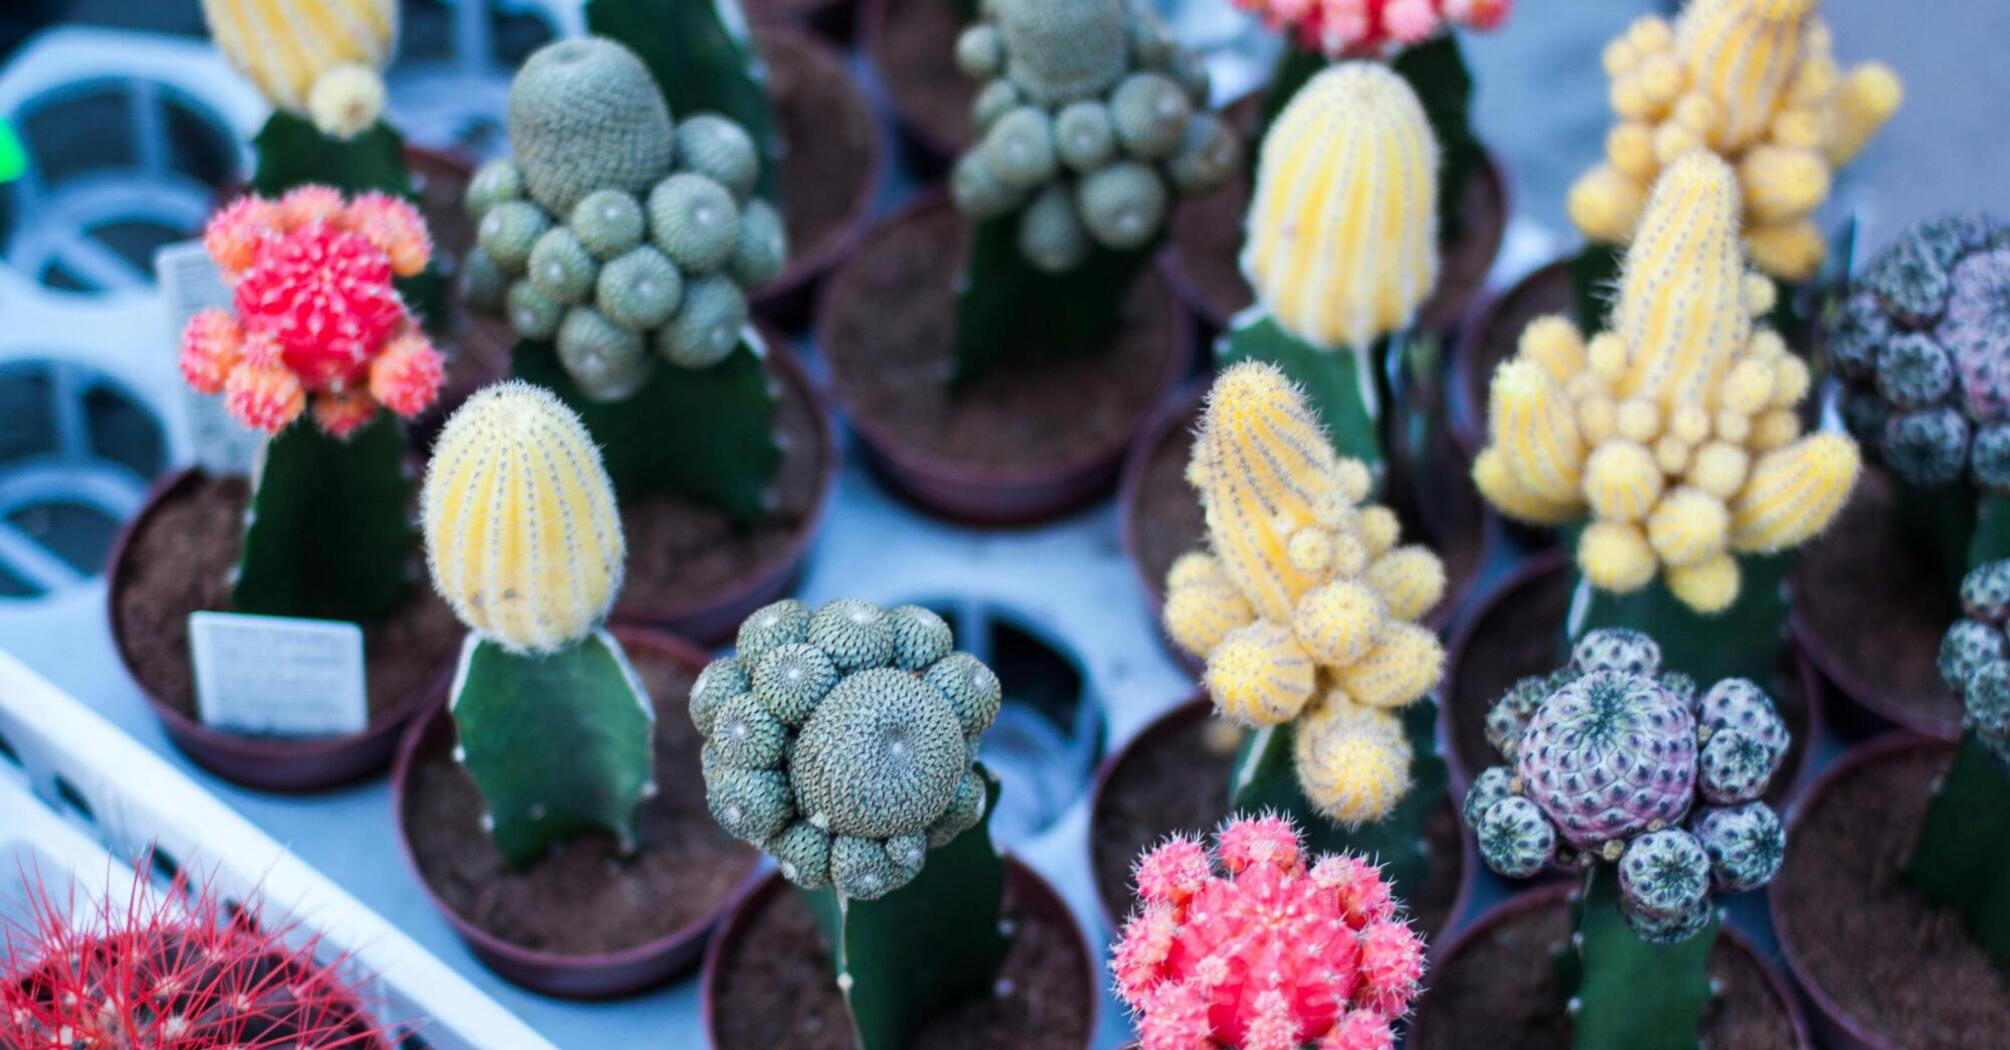 How to make your cacti bloom?